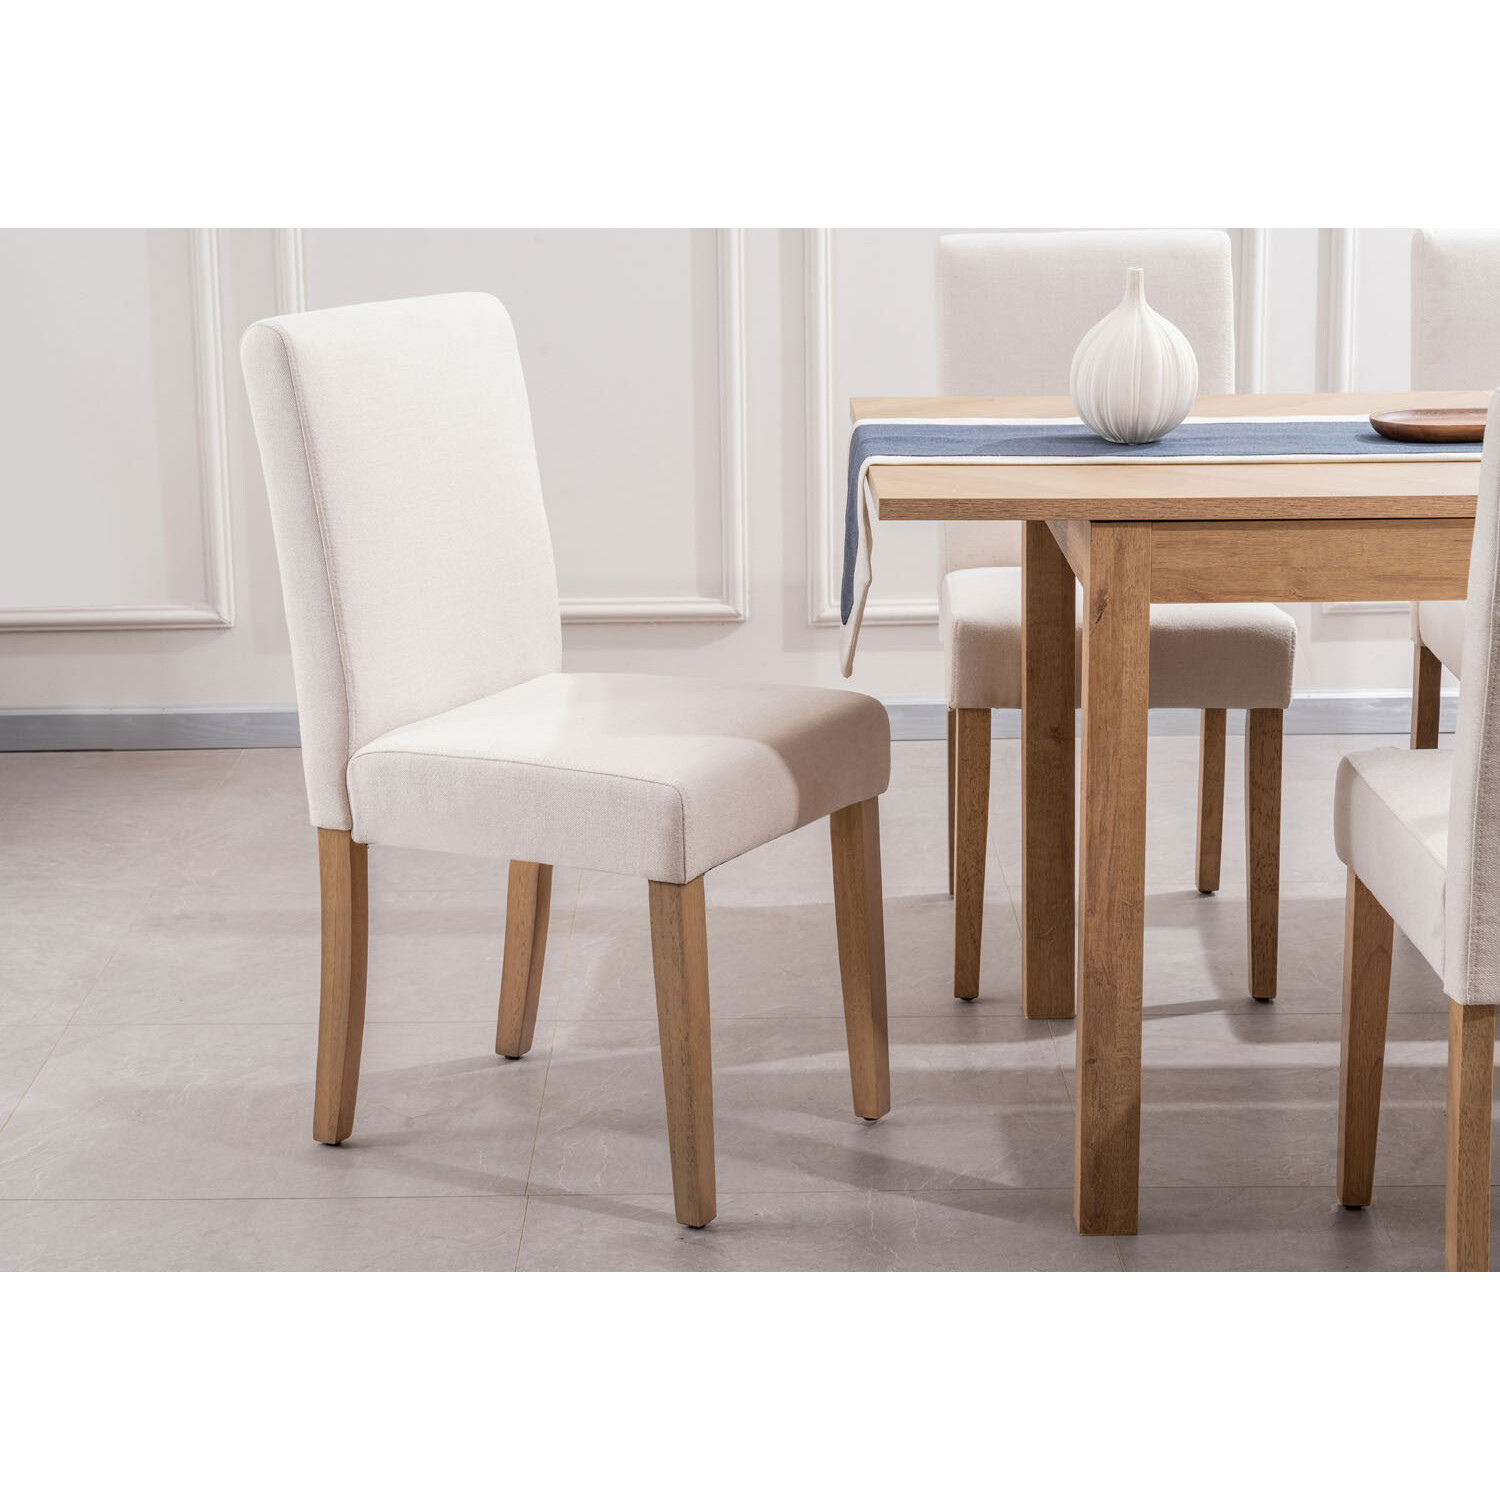 Oxford Set of 2 Cream Linen Dining Chair Image 5